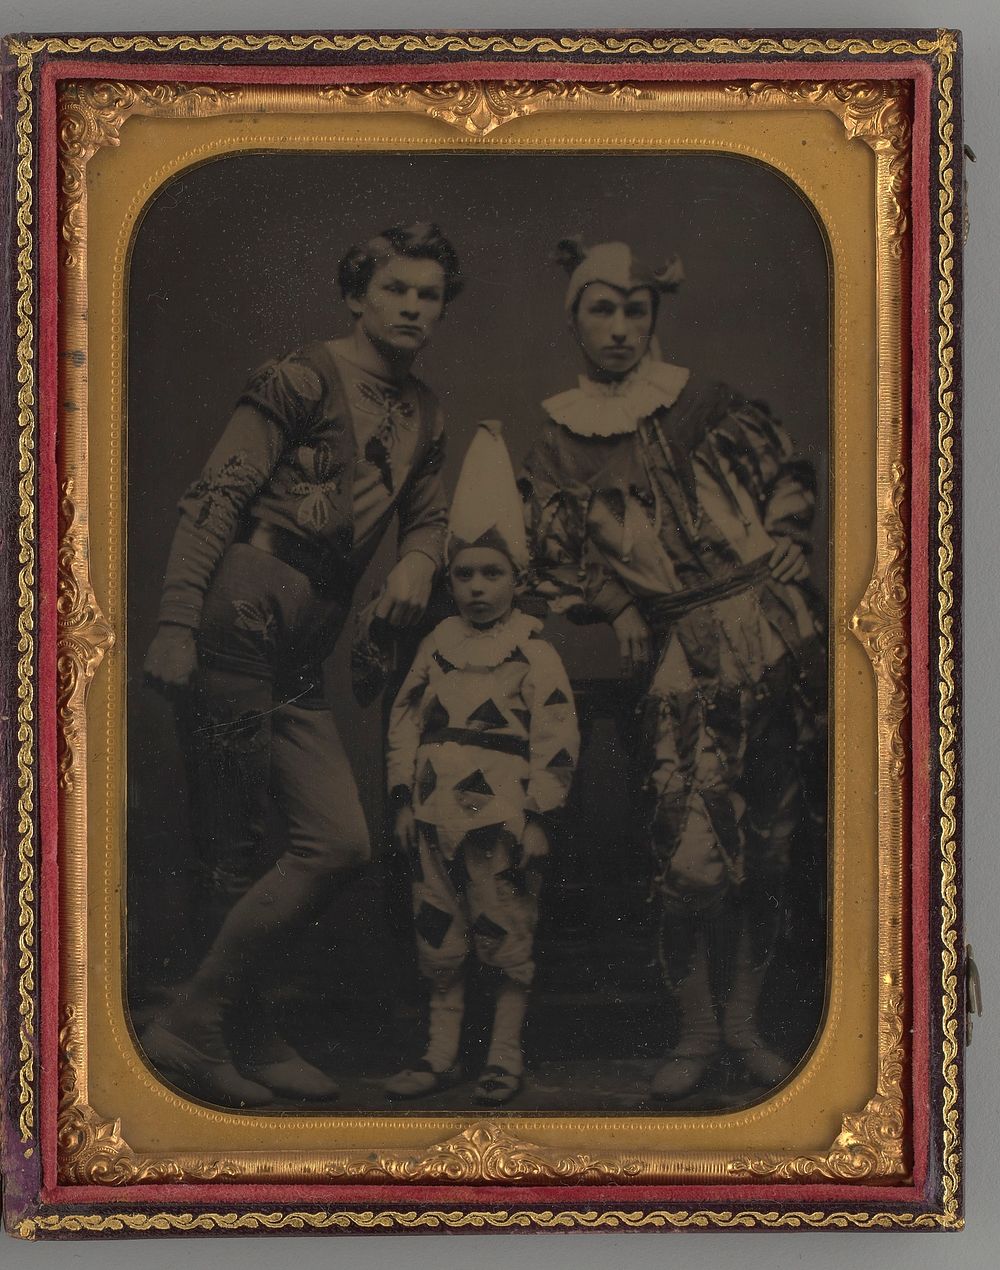 Untitled (Portrait of two Men and one Boy, Dressed in Clown Costumes)